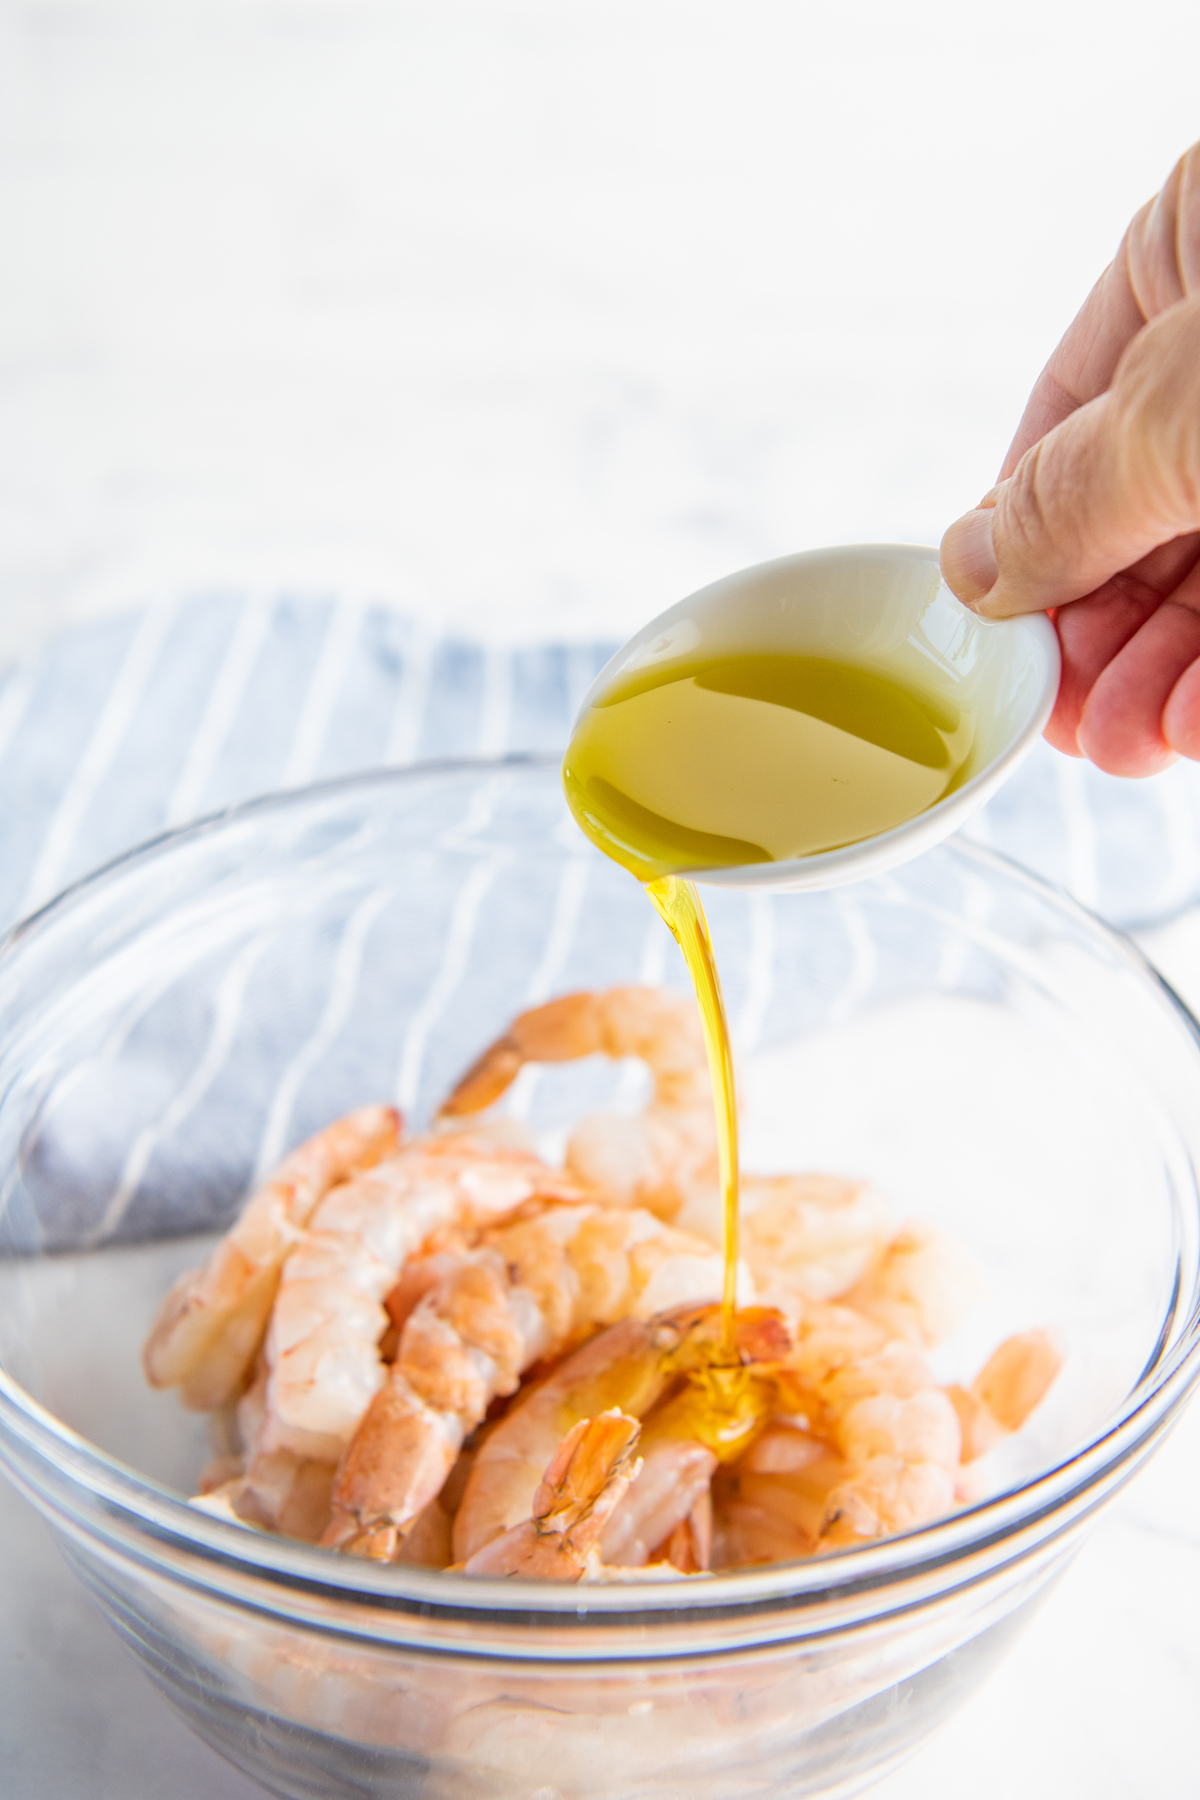 Olive oil is being drizzled onto uncooked shrimp.